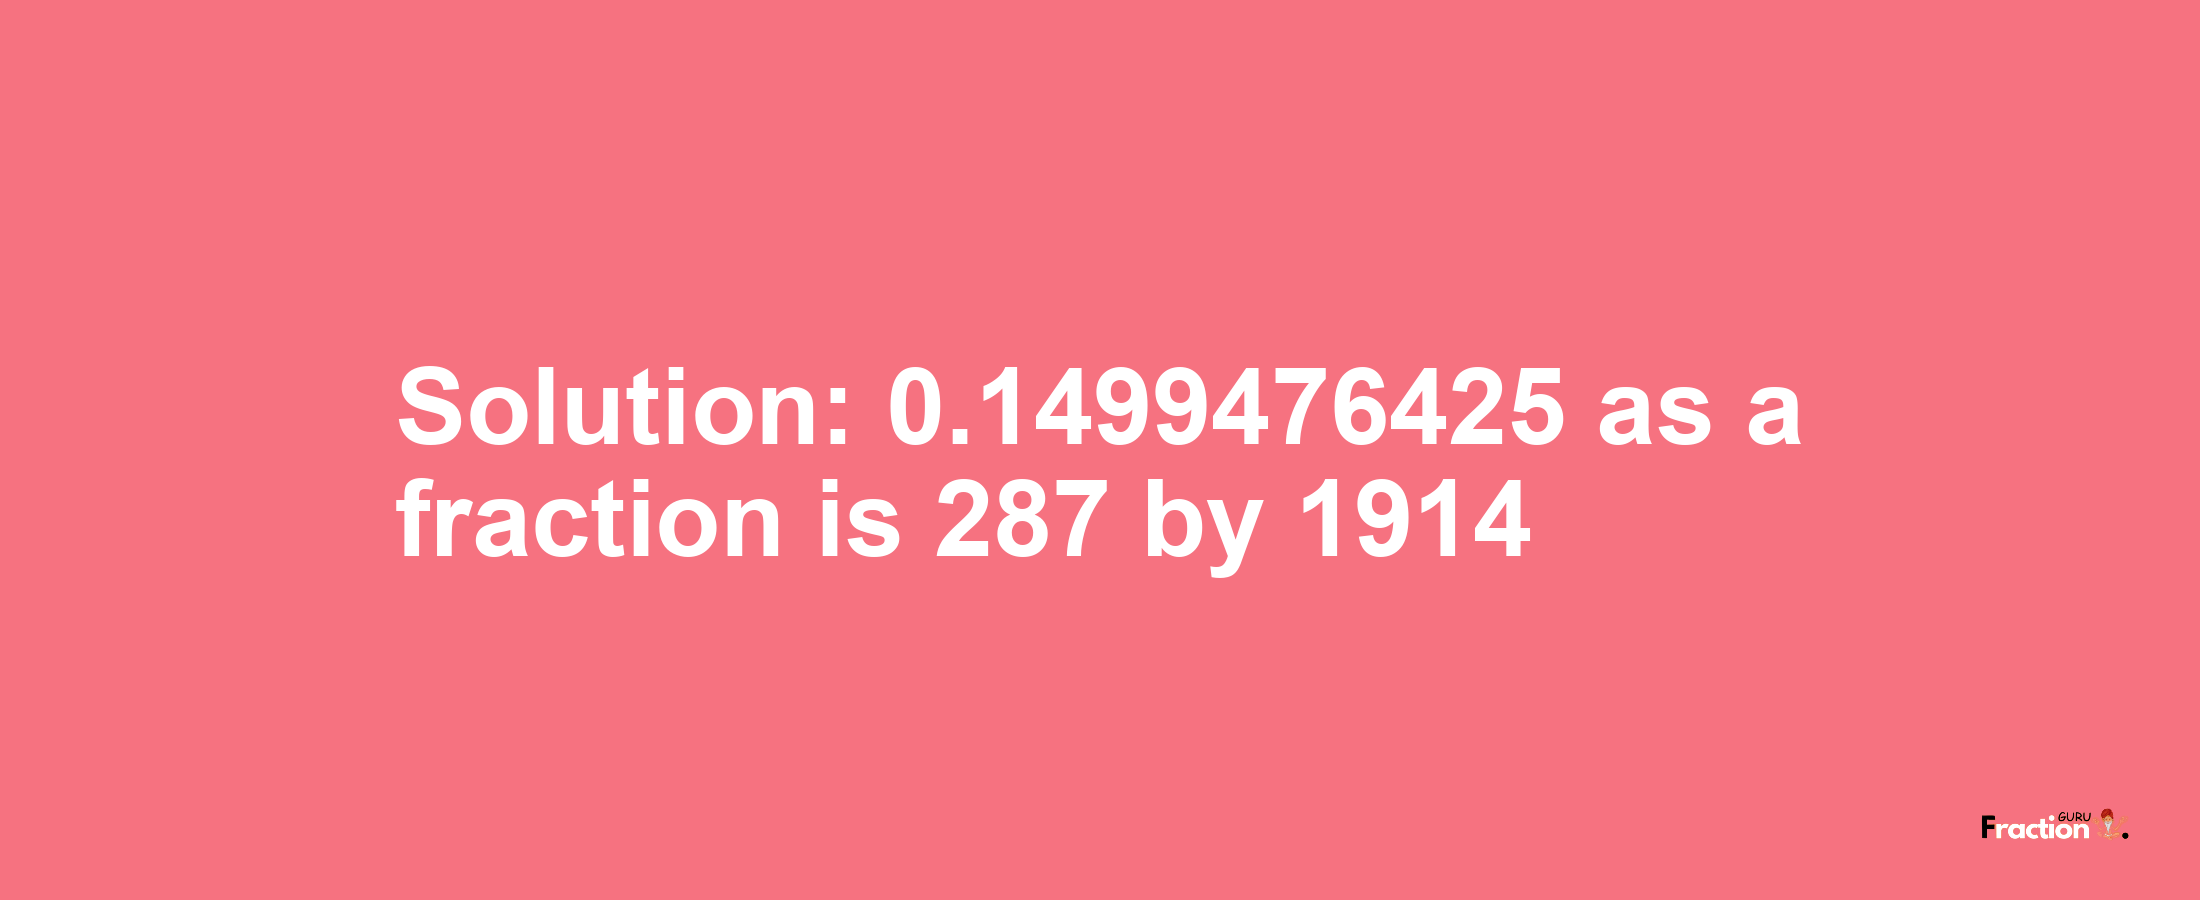 Solution:0.1499476425 as a fraction is 287/1914